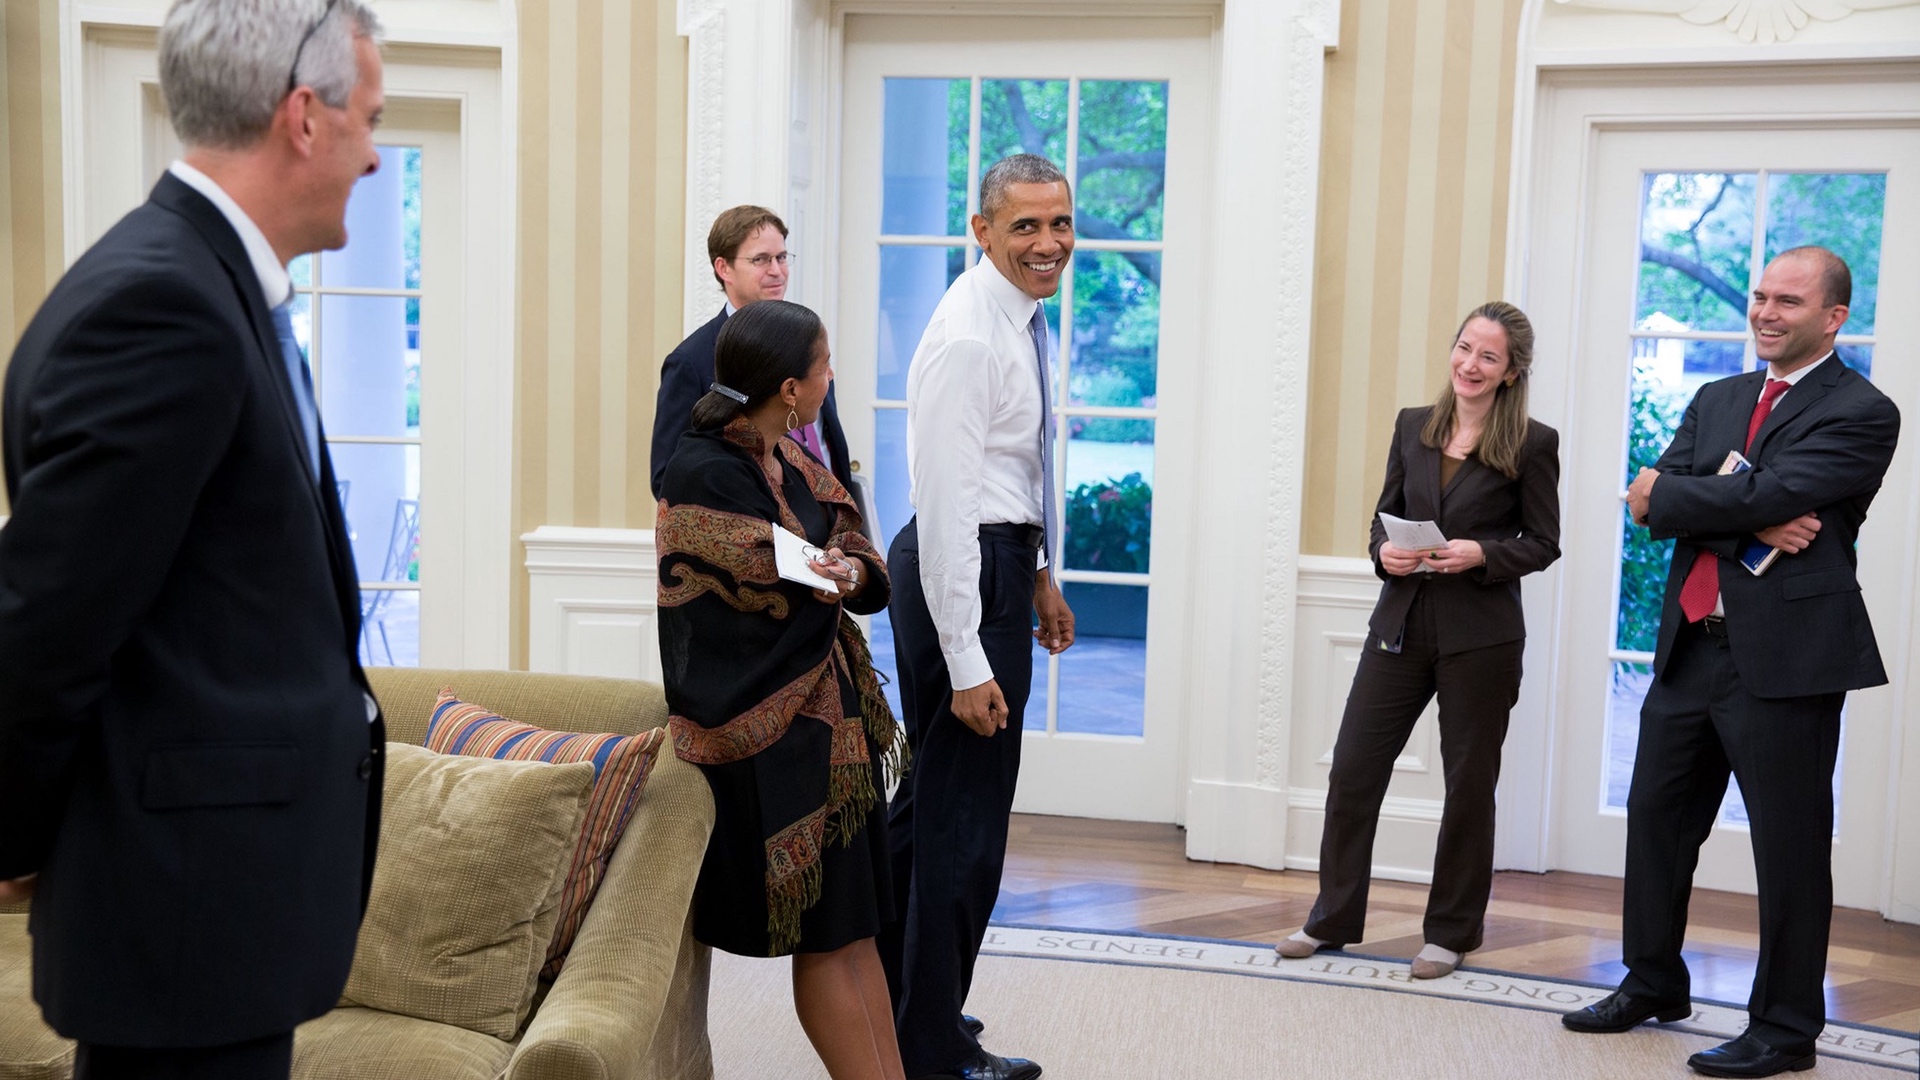 The President Barack Obama with National Security staff members